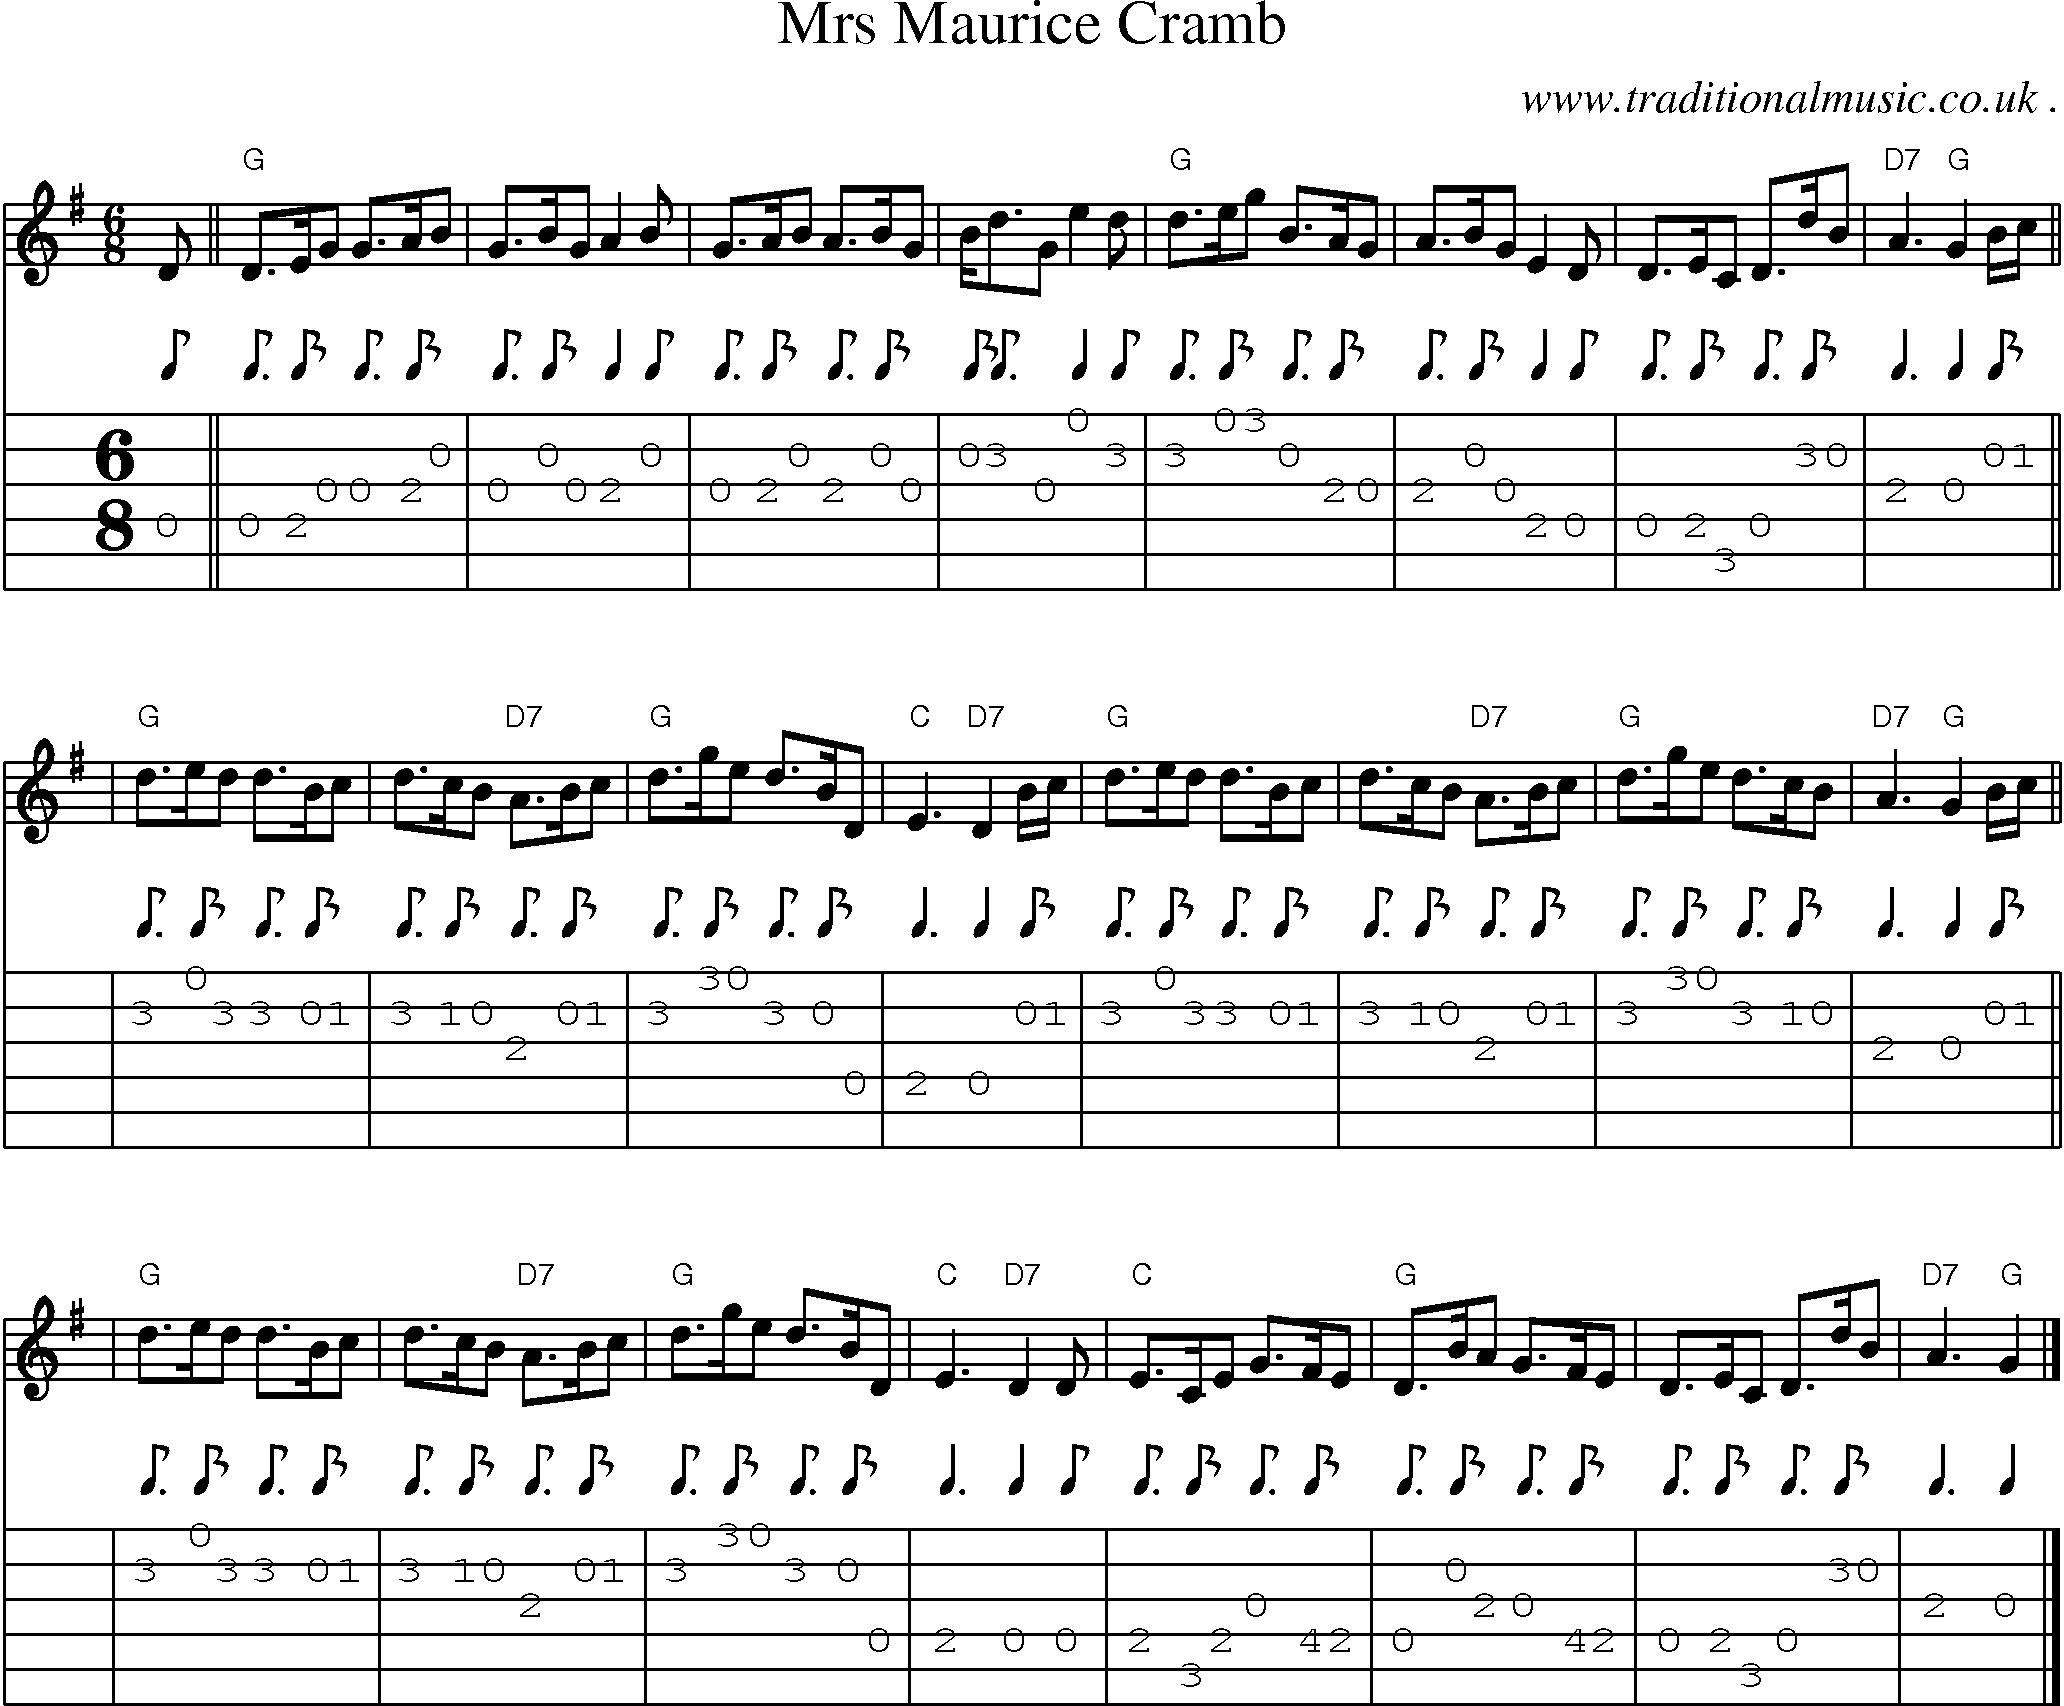 Sheet-music  score, Chords and Guitar Tabs for Mrs Maurice Cramb